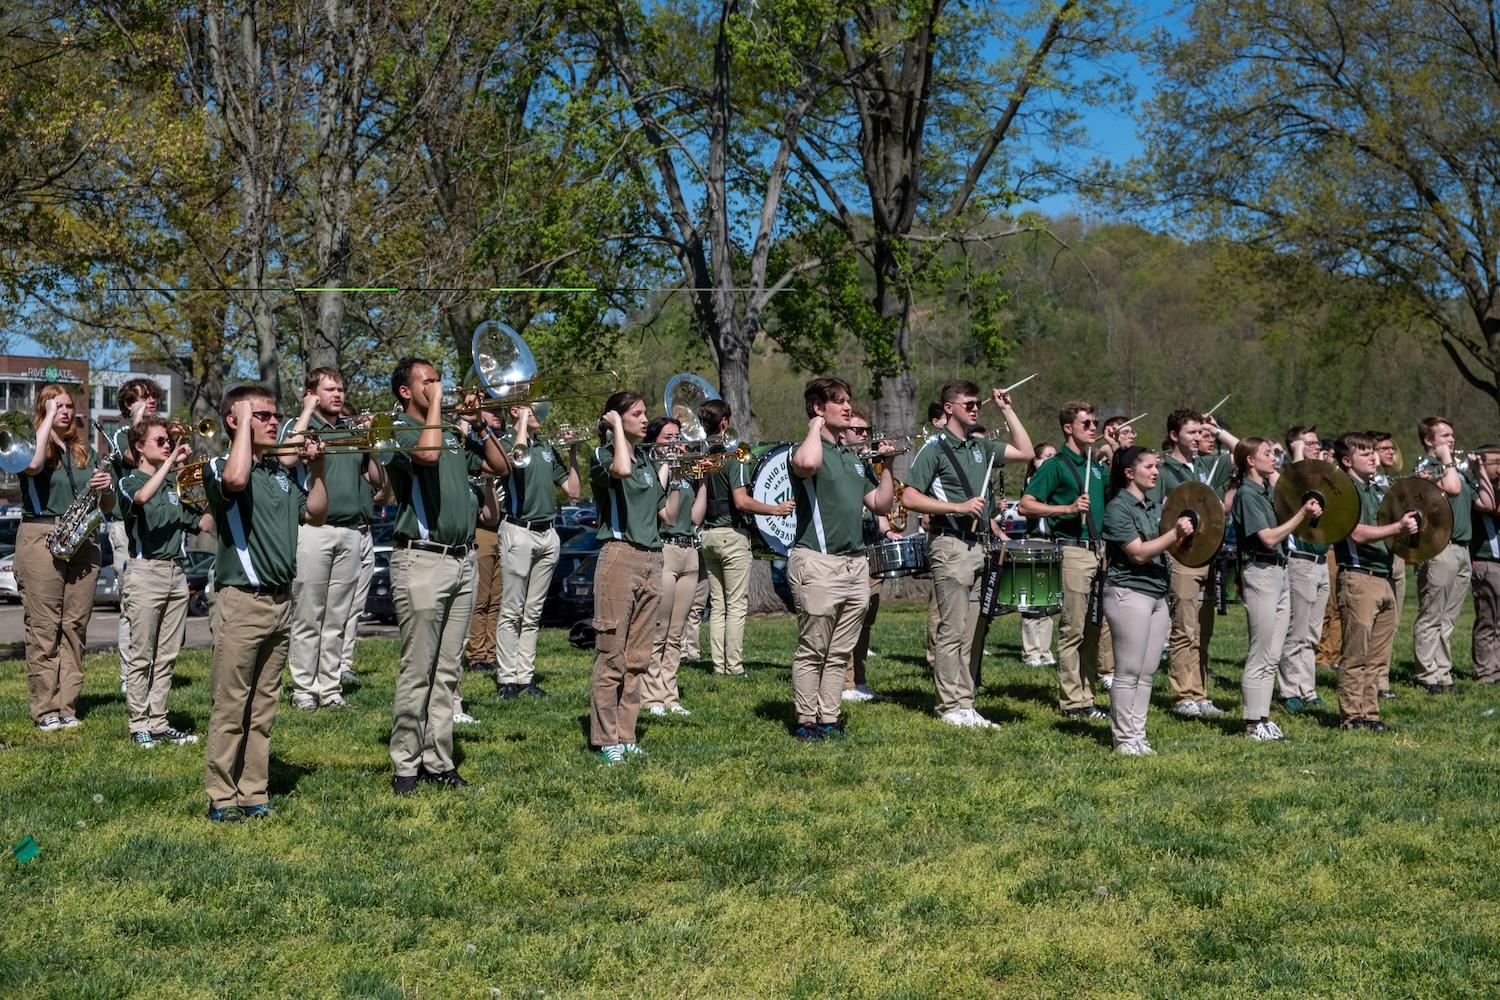 Marching 110 playing a song